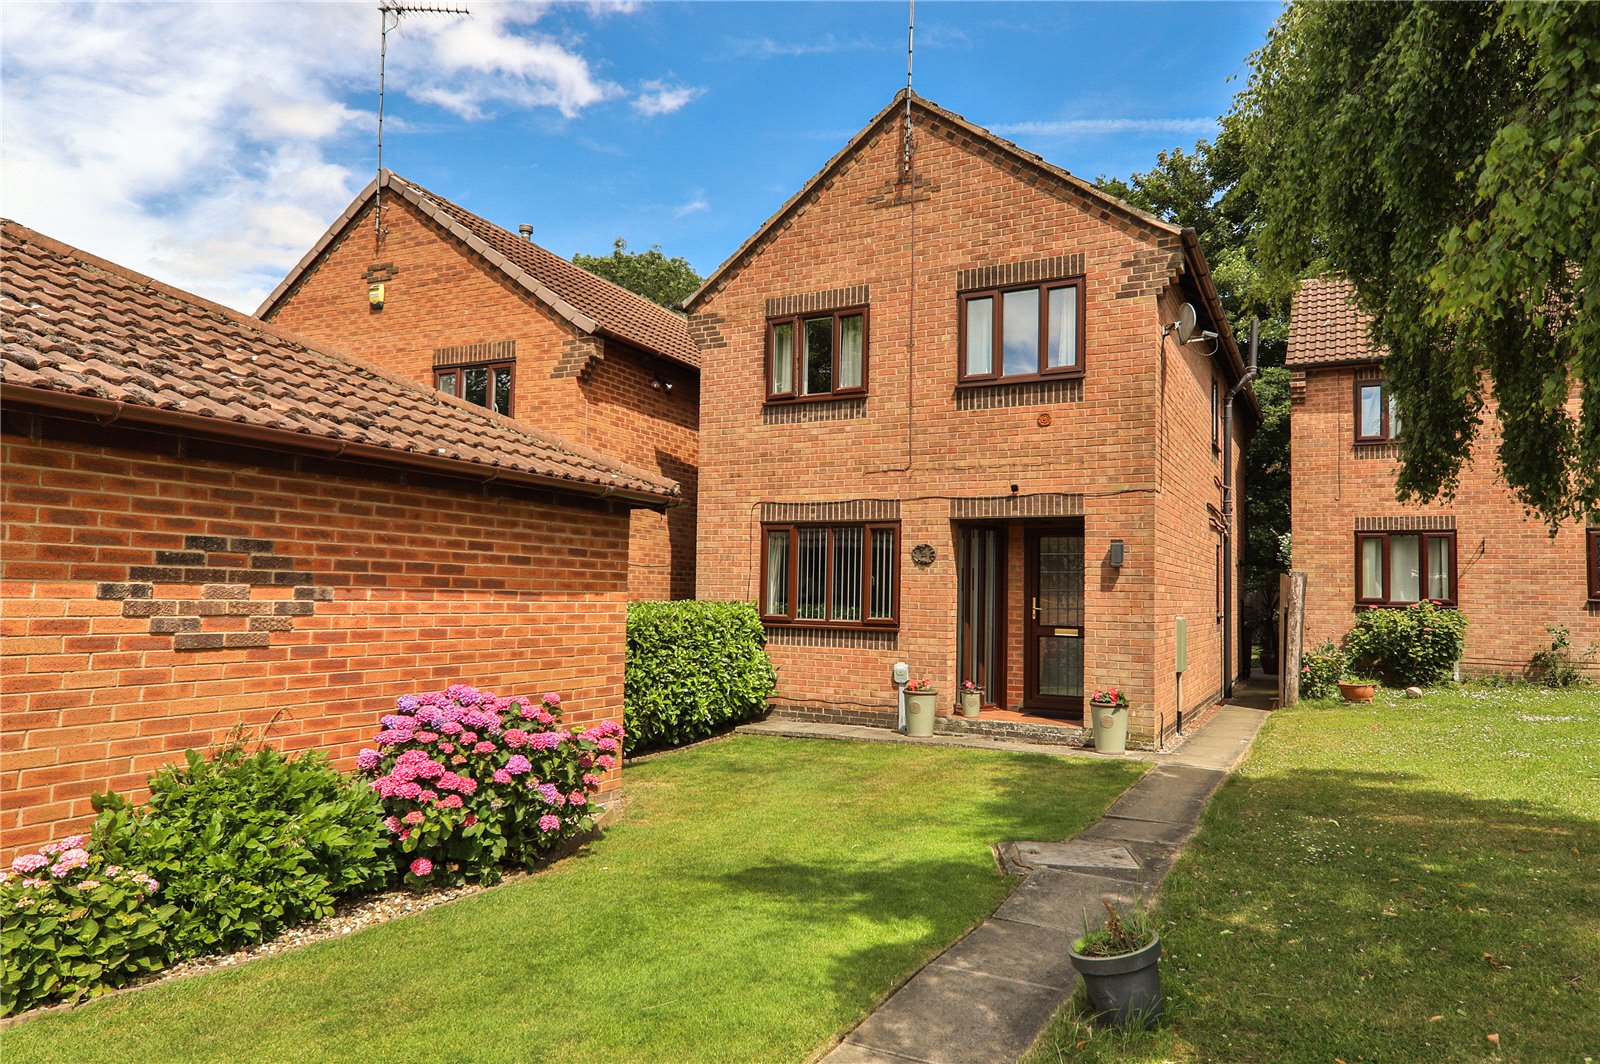 4 bed house for sale in Lawson Close, Walkington - Property Image 1